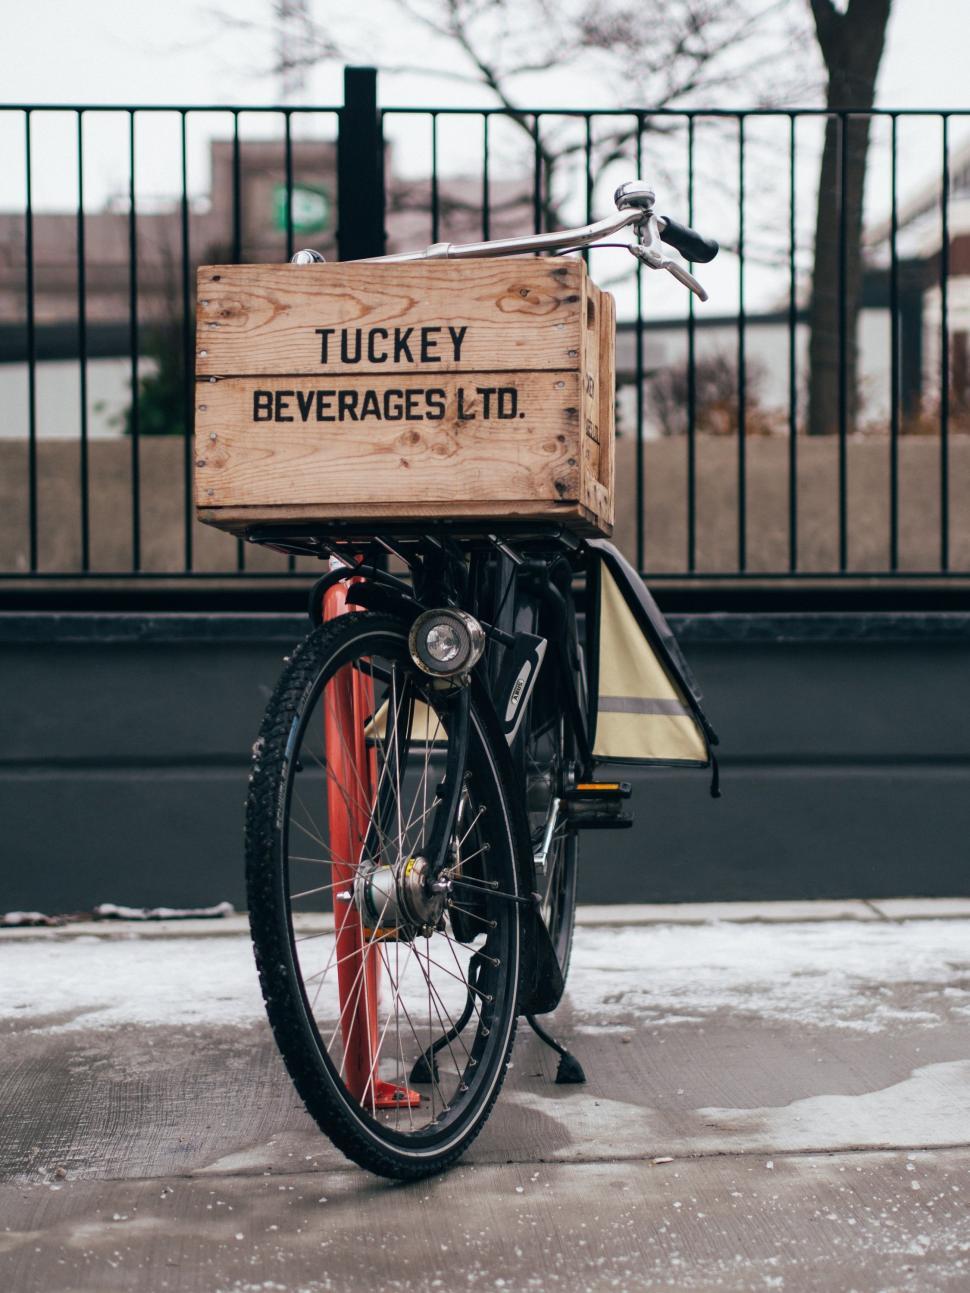 Free Image of Home Delivery of Tuckey beverages 